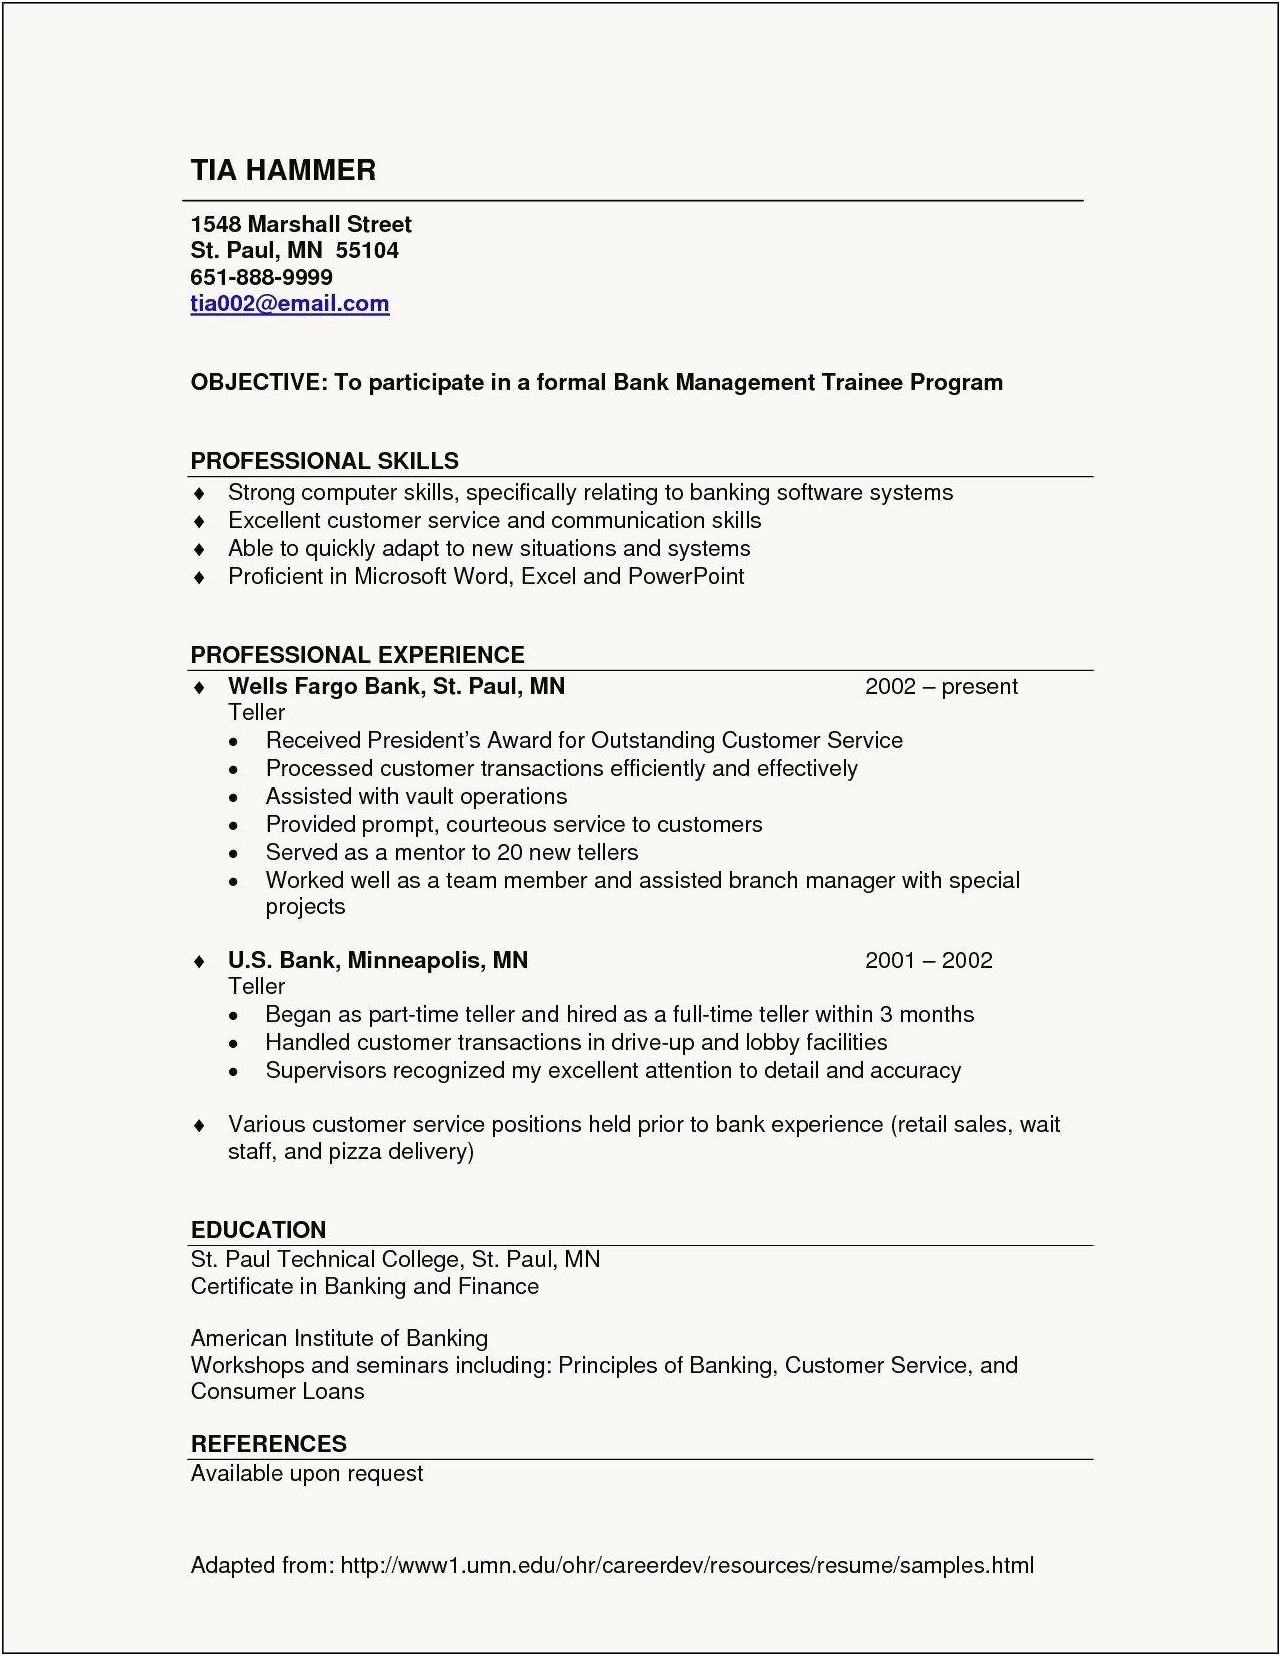 Sample Resume With Software Skills